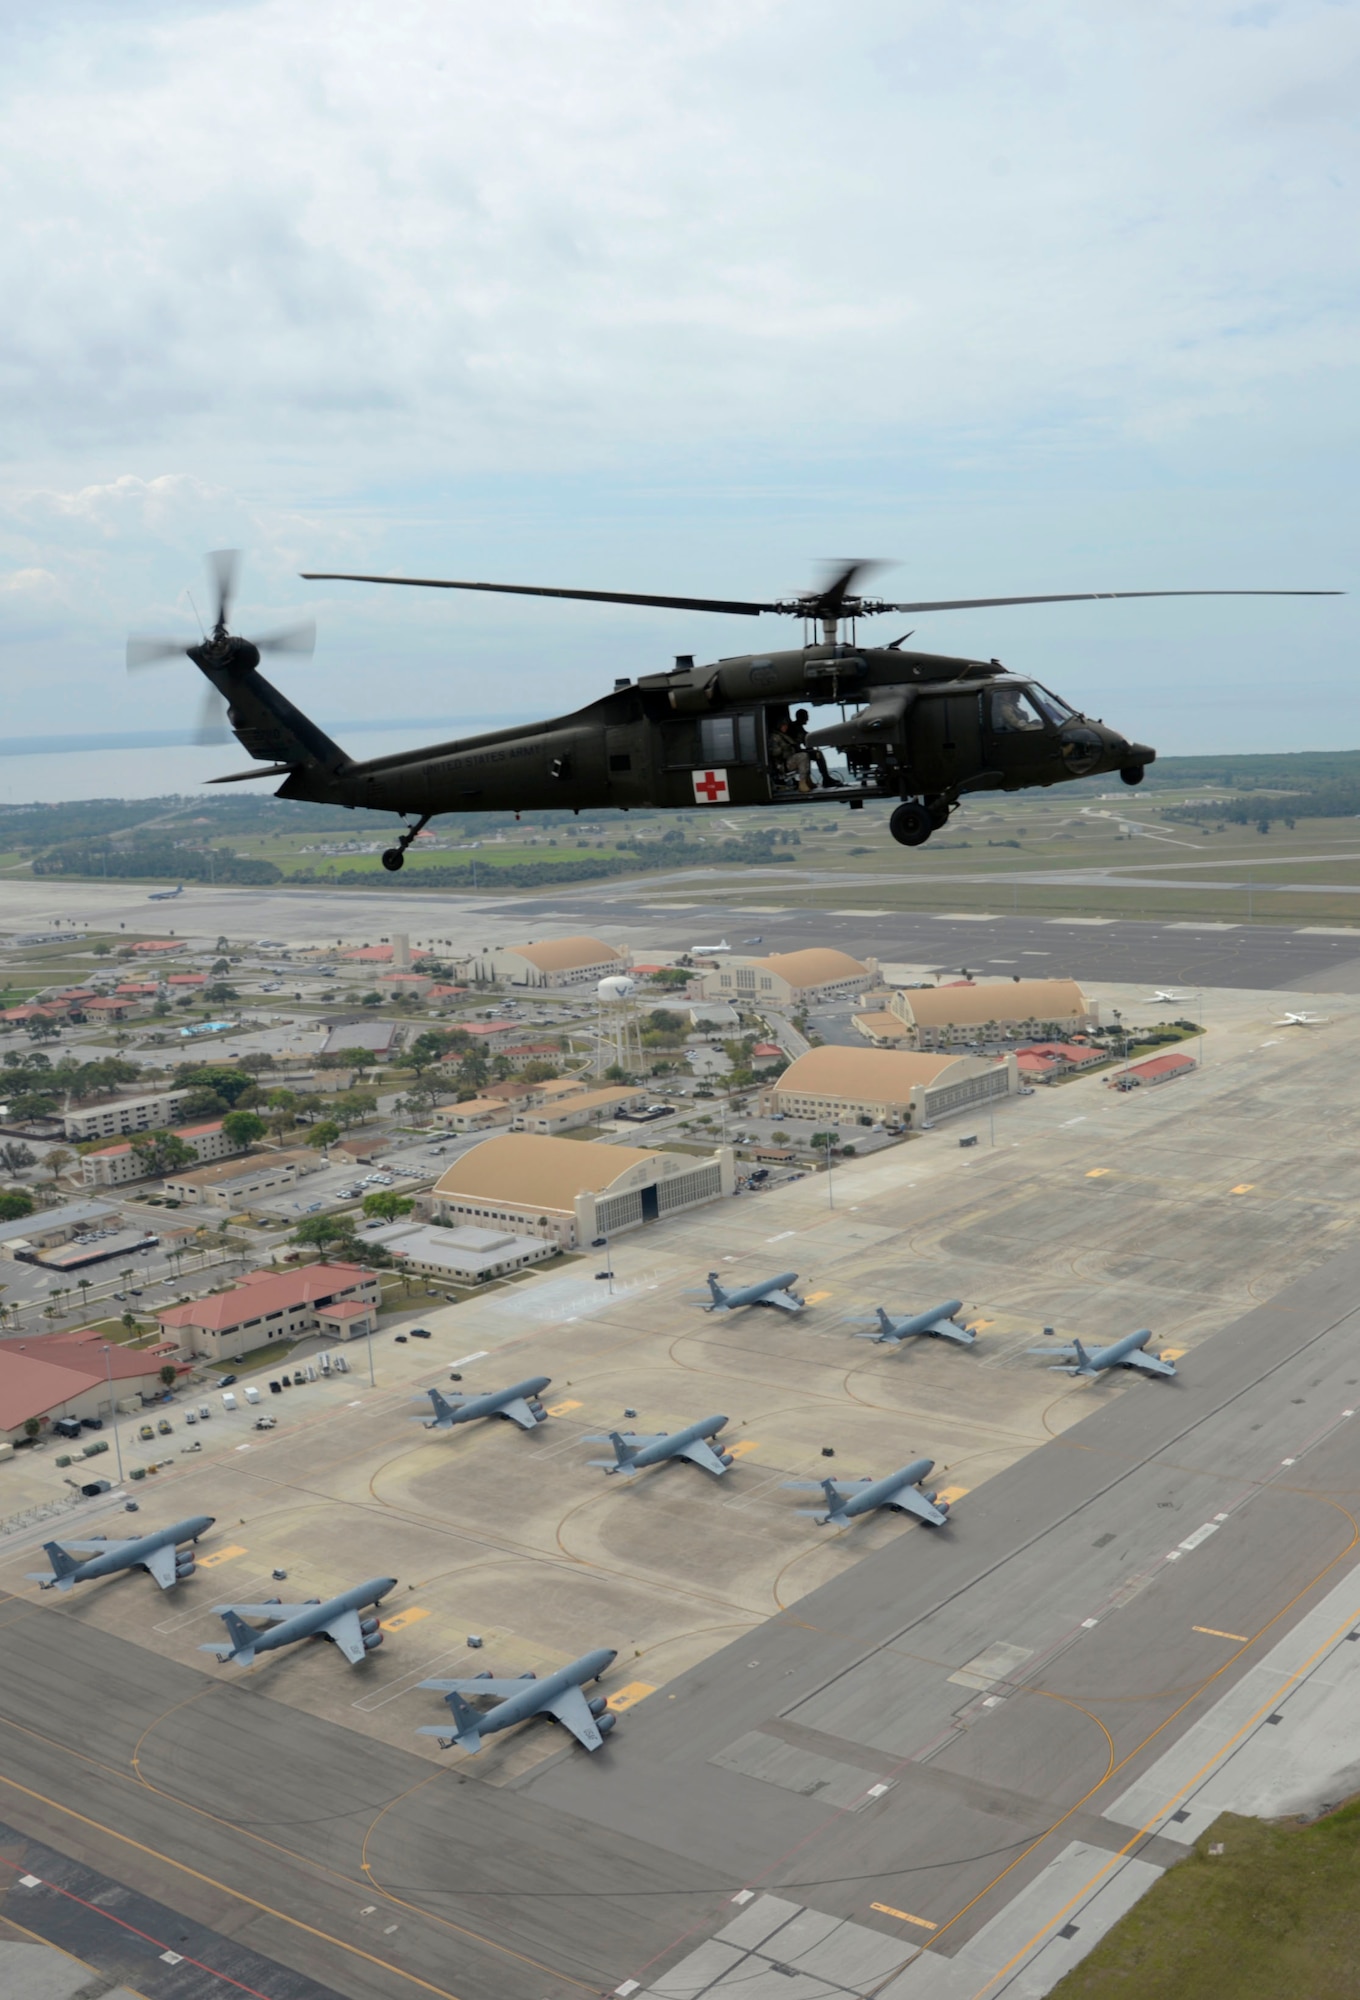 A HH-60 Black Hawk helicopter flies over the airfield during an aeromedical evacuation exercise at MacDill Air Force Base, Fla., March 12, 2017. The exercise compiled knowledge and hands-on training of site acquirement, set up, patient movement, patient care and patient staging. (U.S. Air Force photo by Senior Airman Tori Schultz)